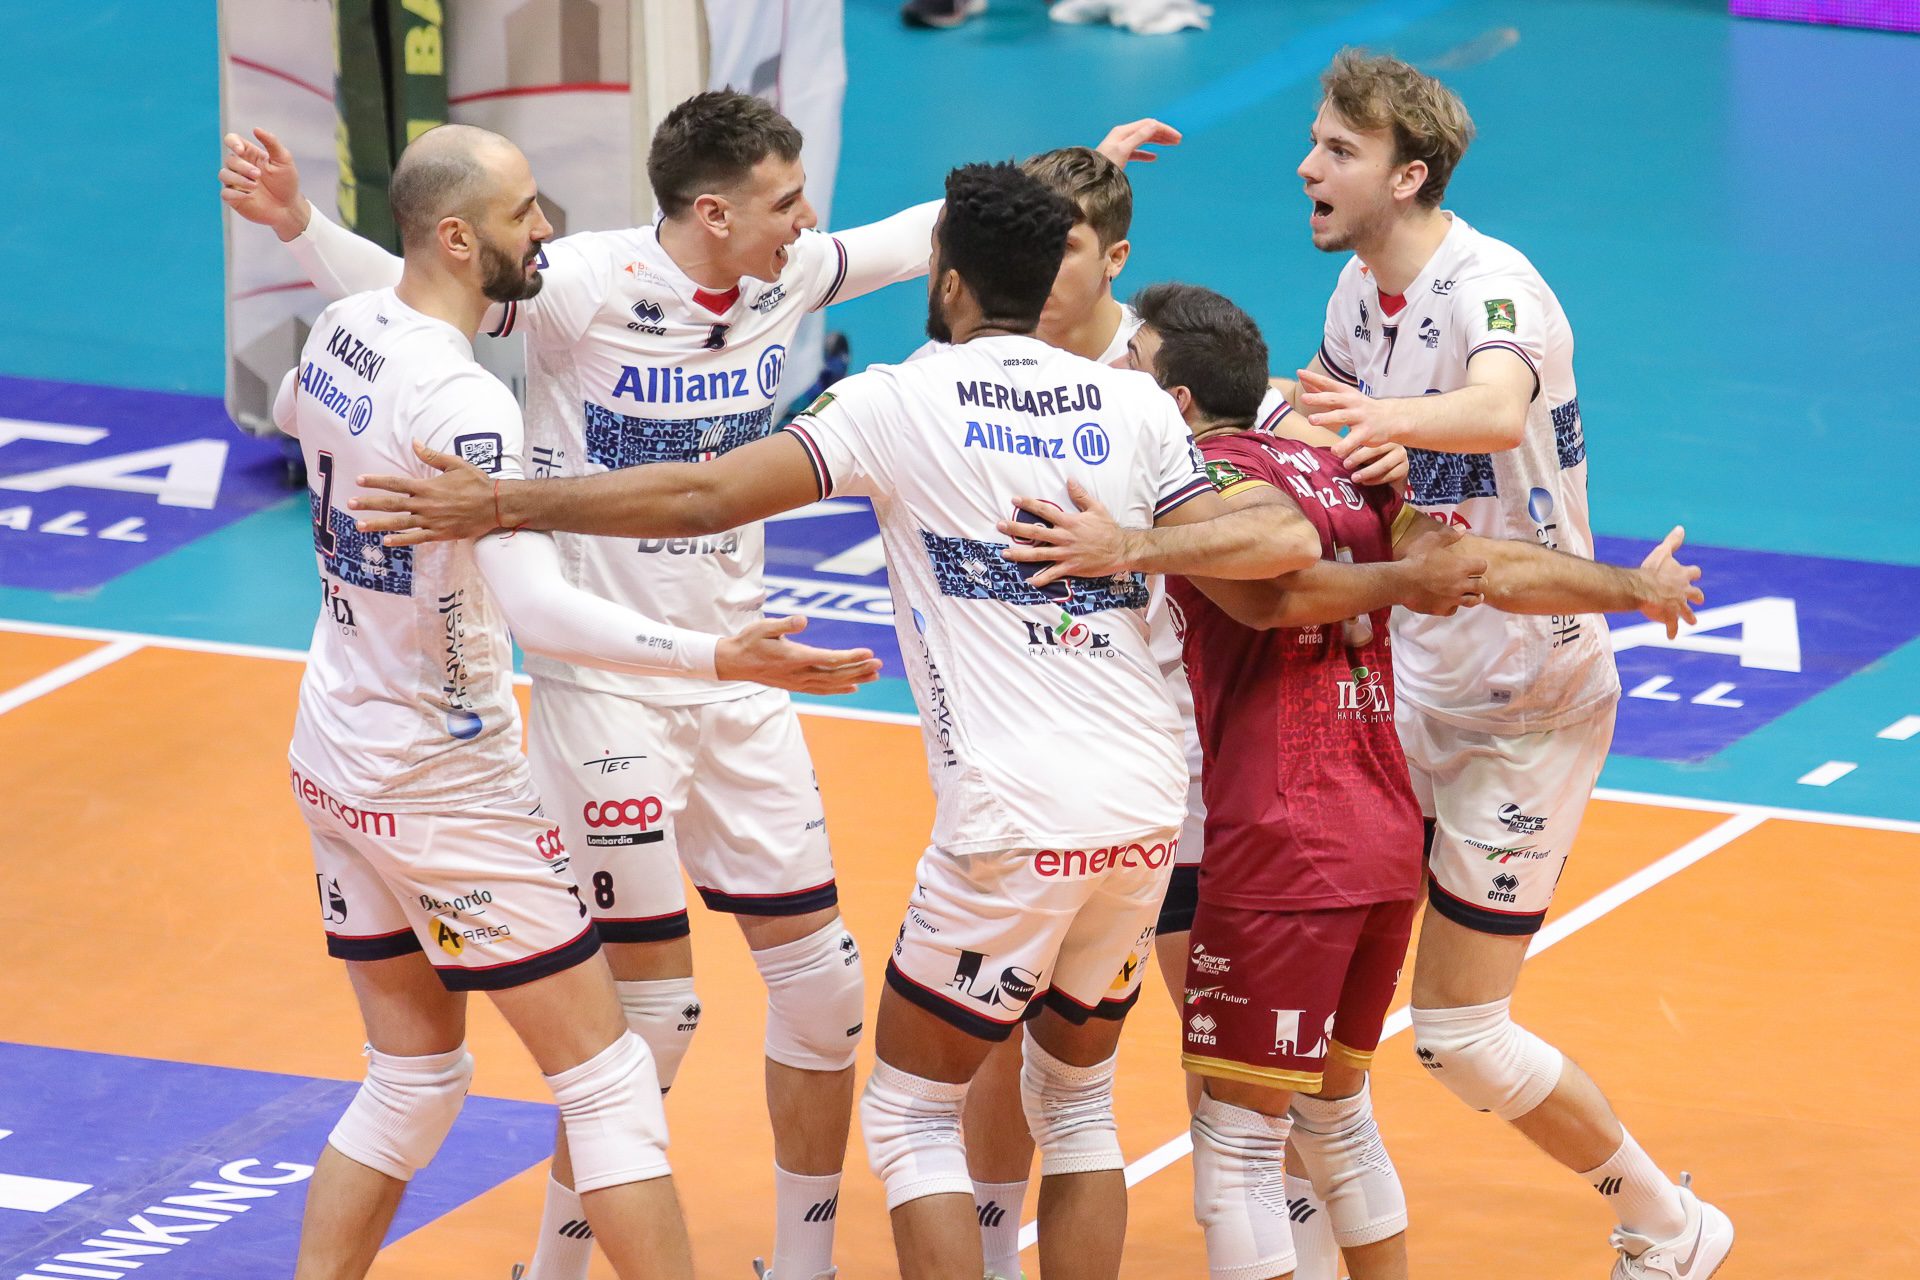 WorldofVolley :: ITA M: Milano Triumphs Over Monza in a Clean Sweep